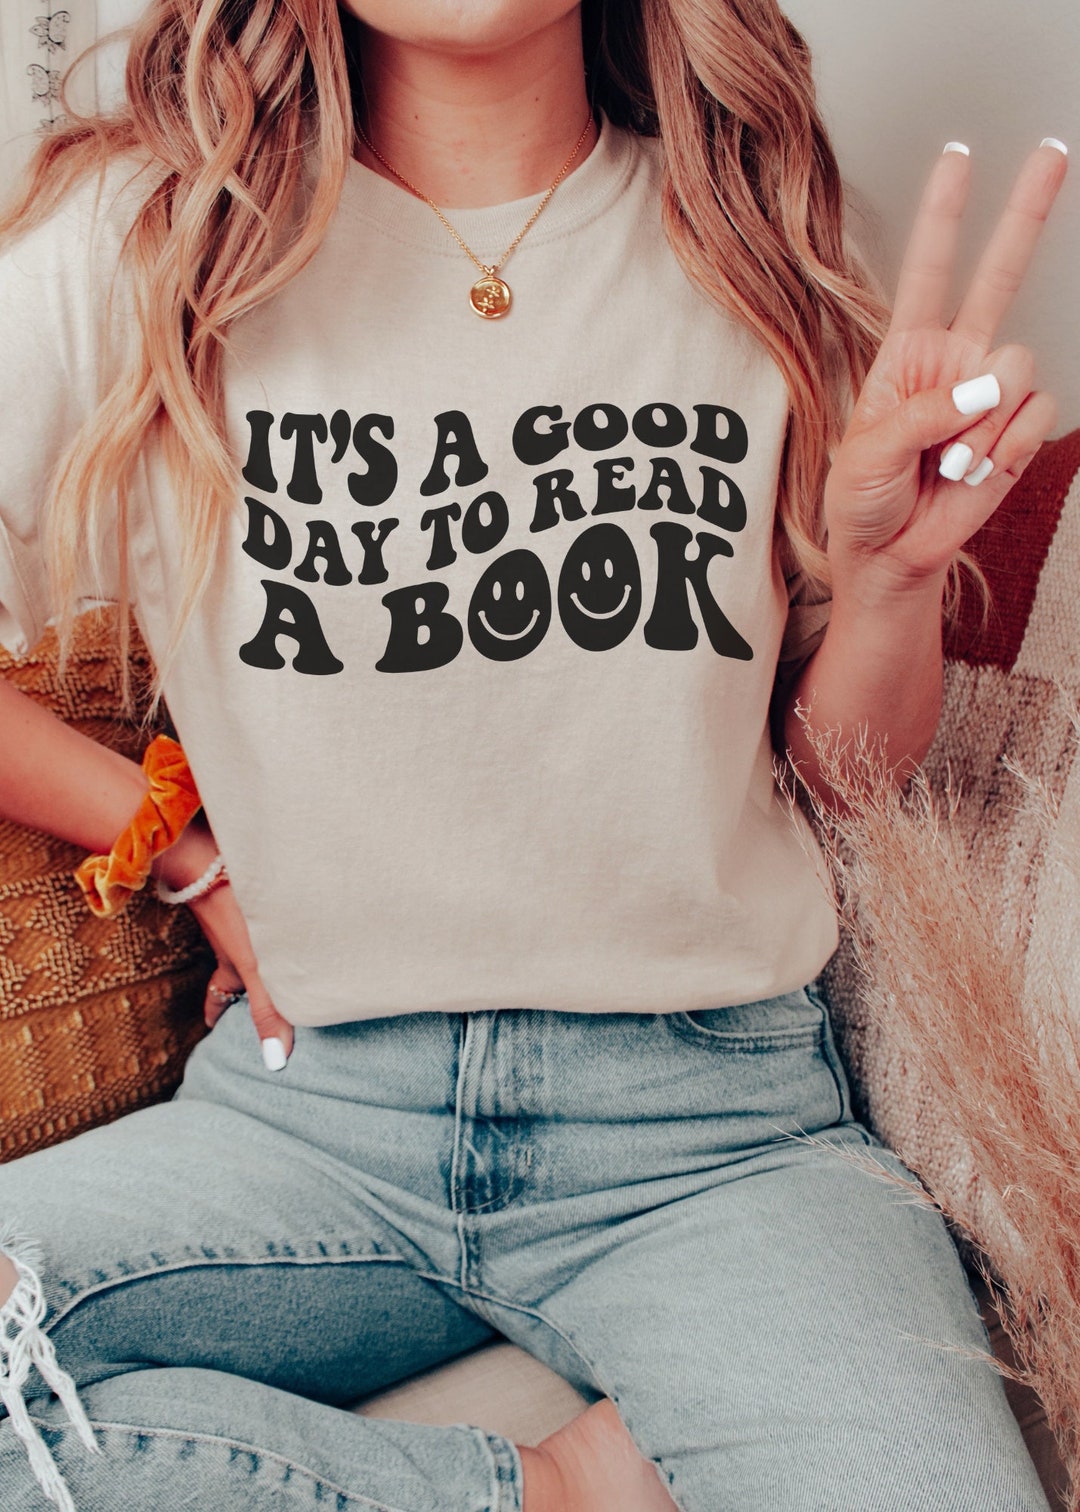 It's A Good Day to Read a Book Shirt TBR Book Stack - Etsy